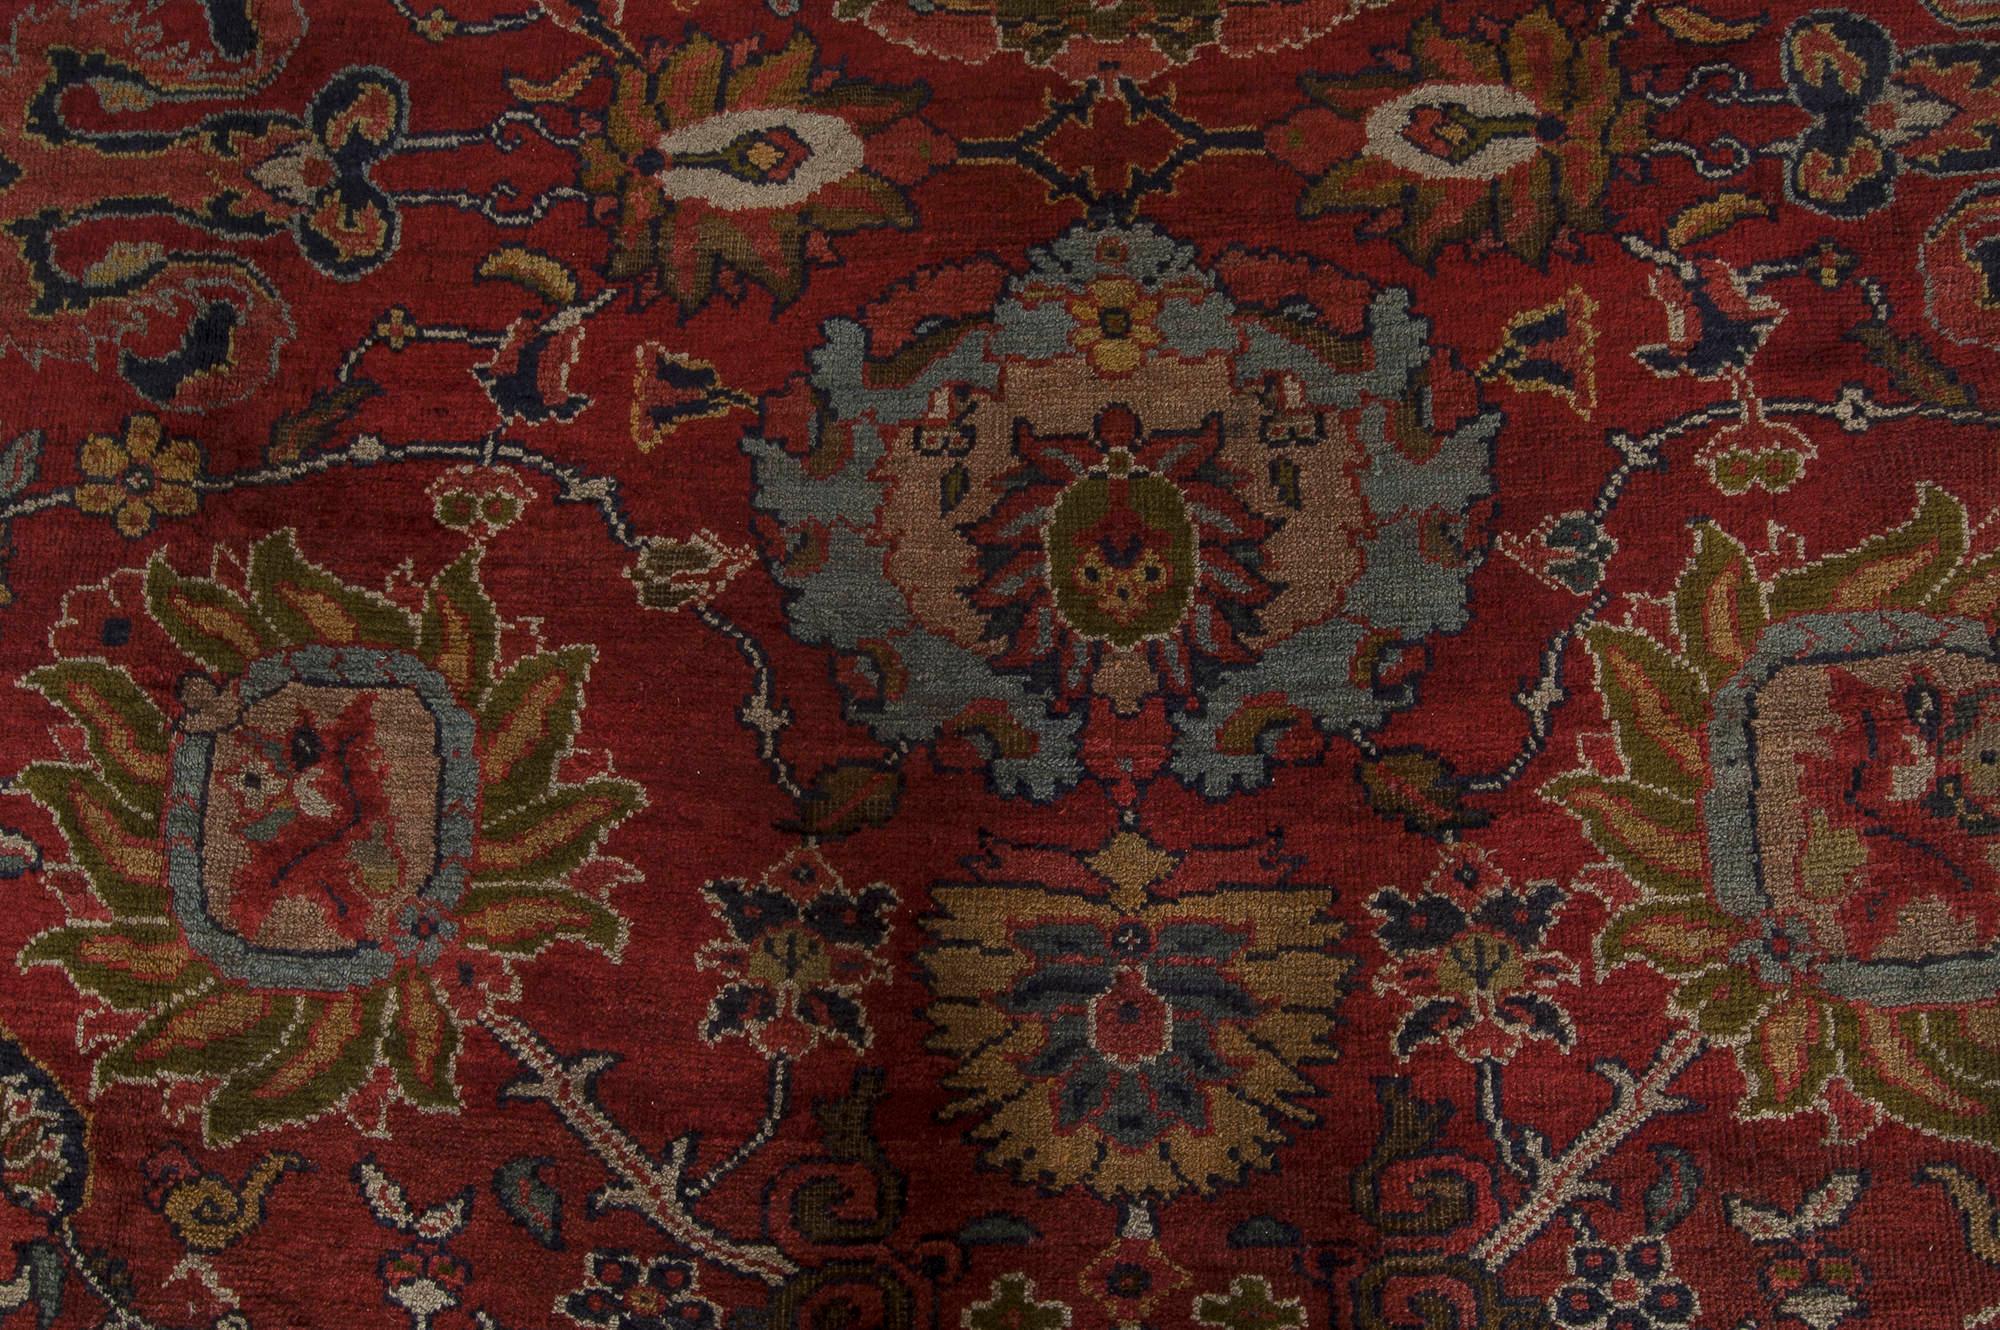 19th century Persian Sultanabad red botanical handmade rug
Size: 12'0